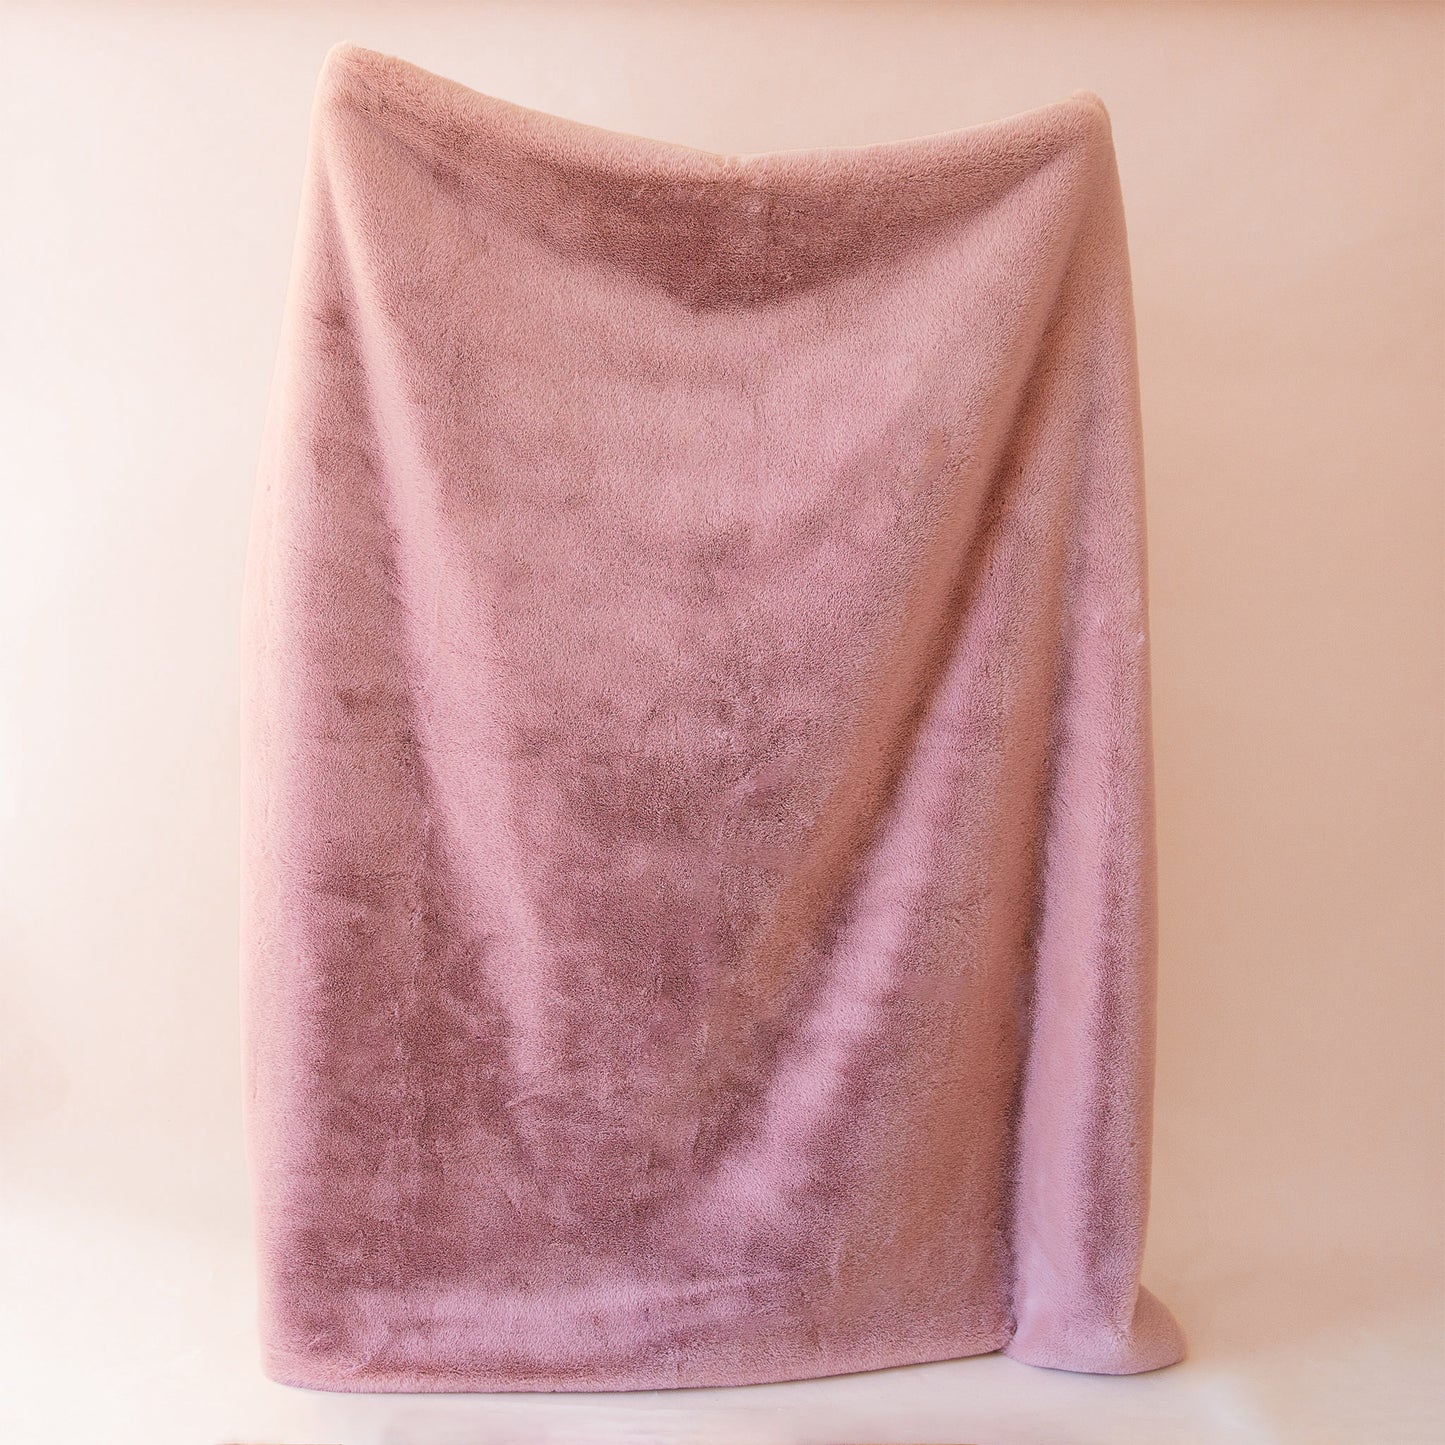 On a tan background is a dusty rose faux fur throw blanket. 